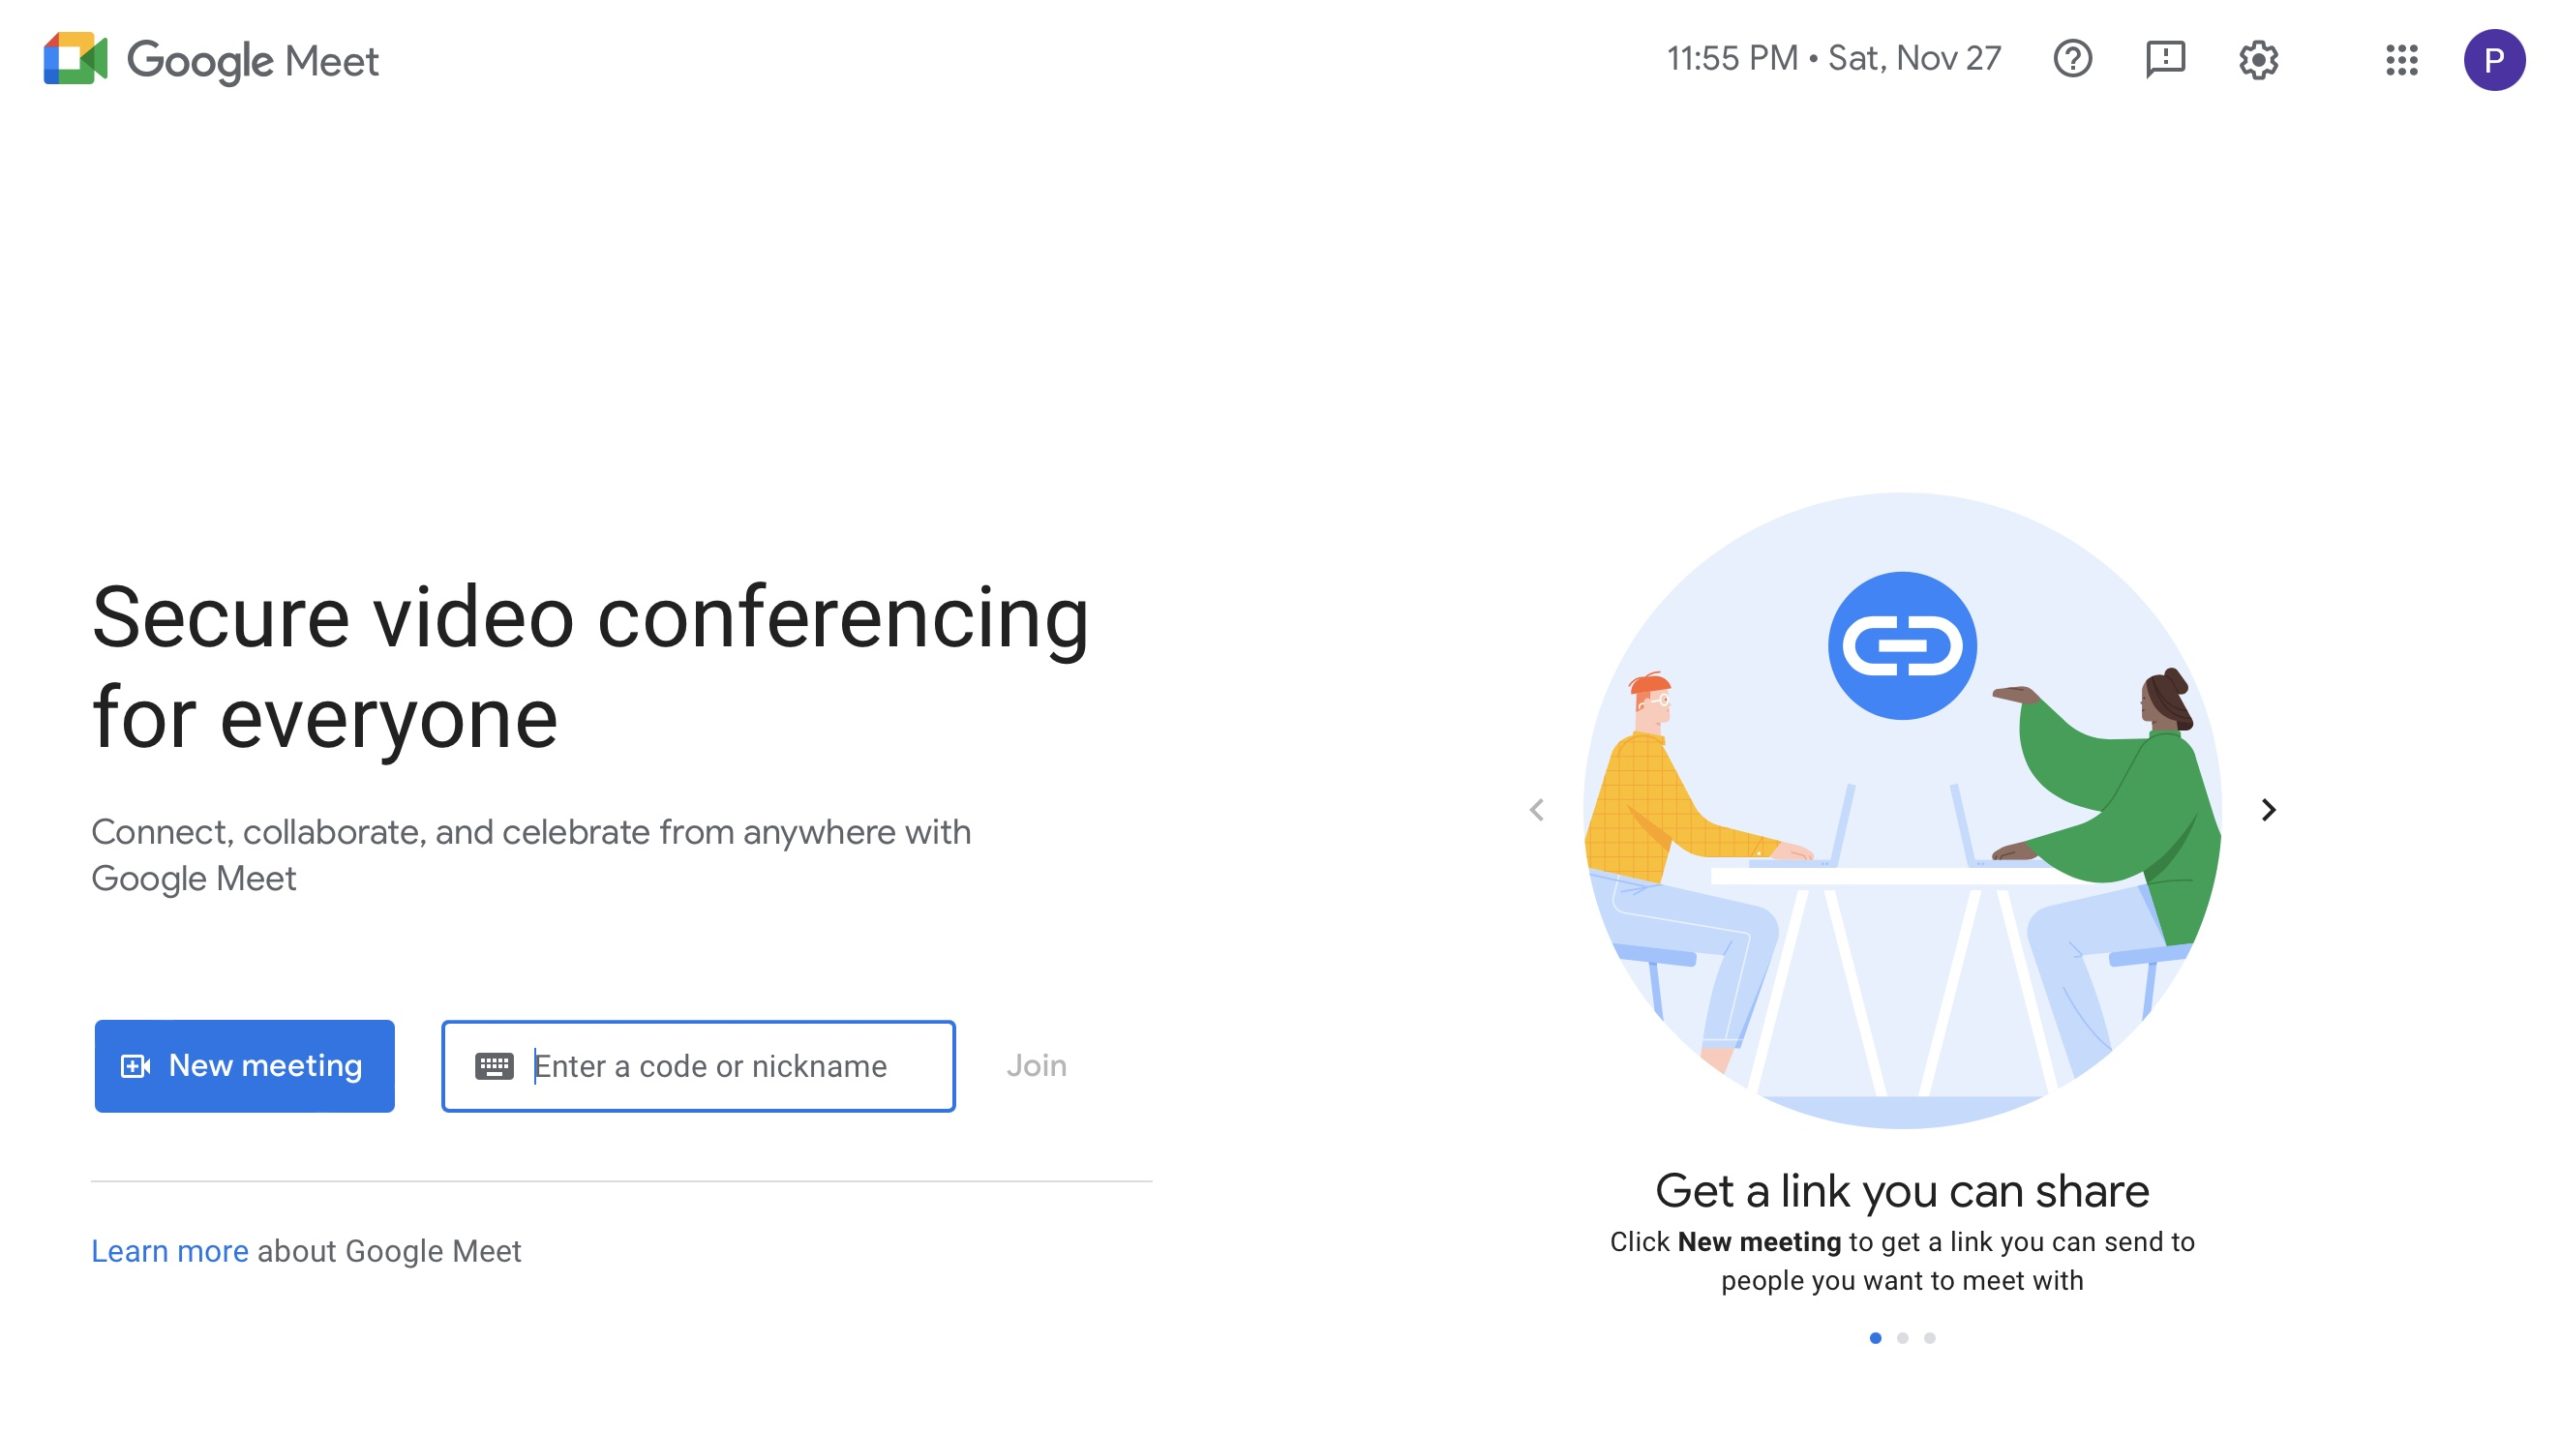 Getting started with Google Meet